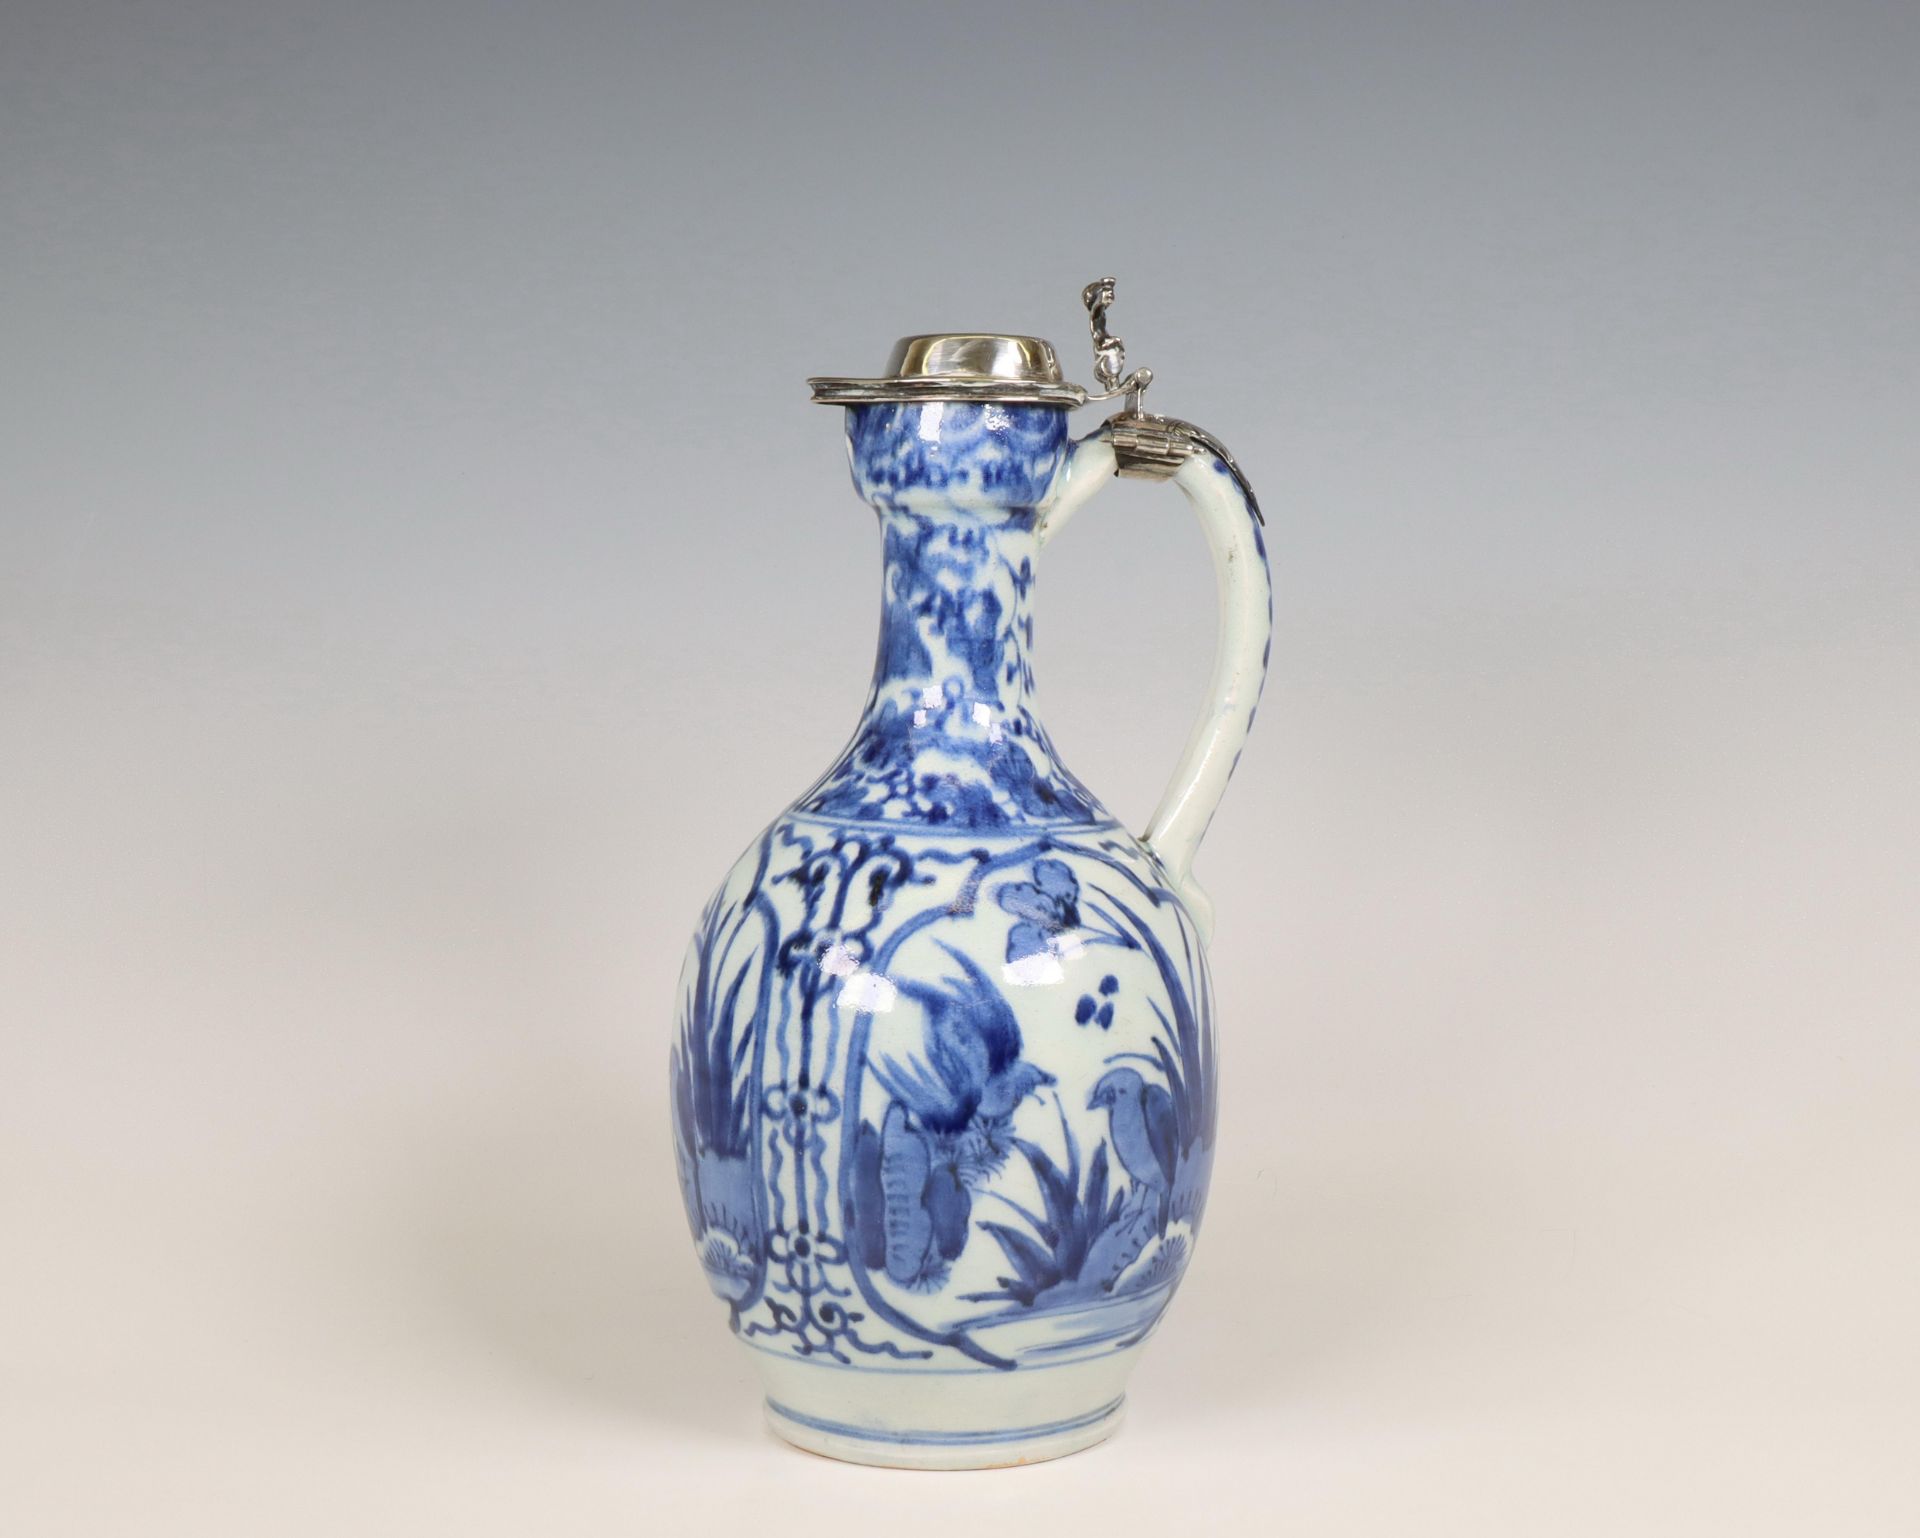 Japan, silver-mounted blue and white Arita porcelain jug, mid-17th century, the silver later,